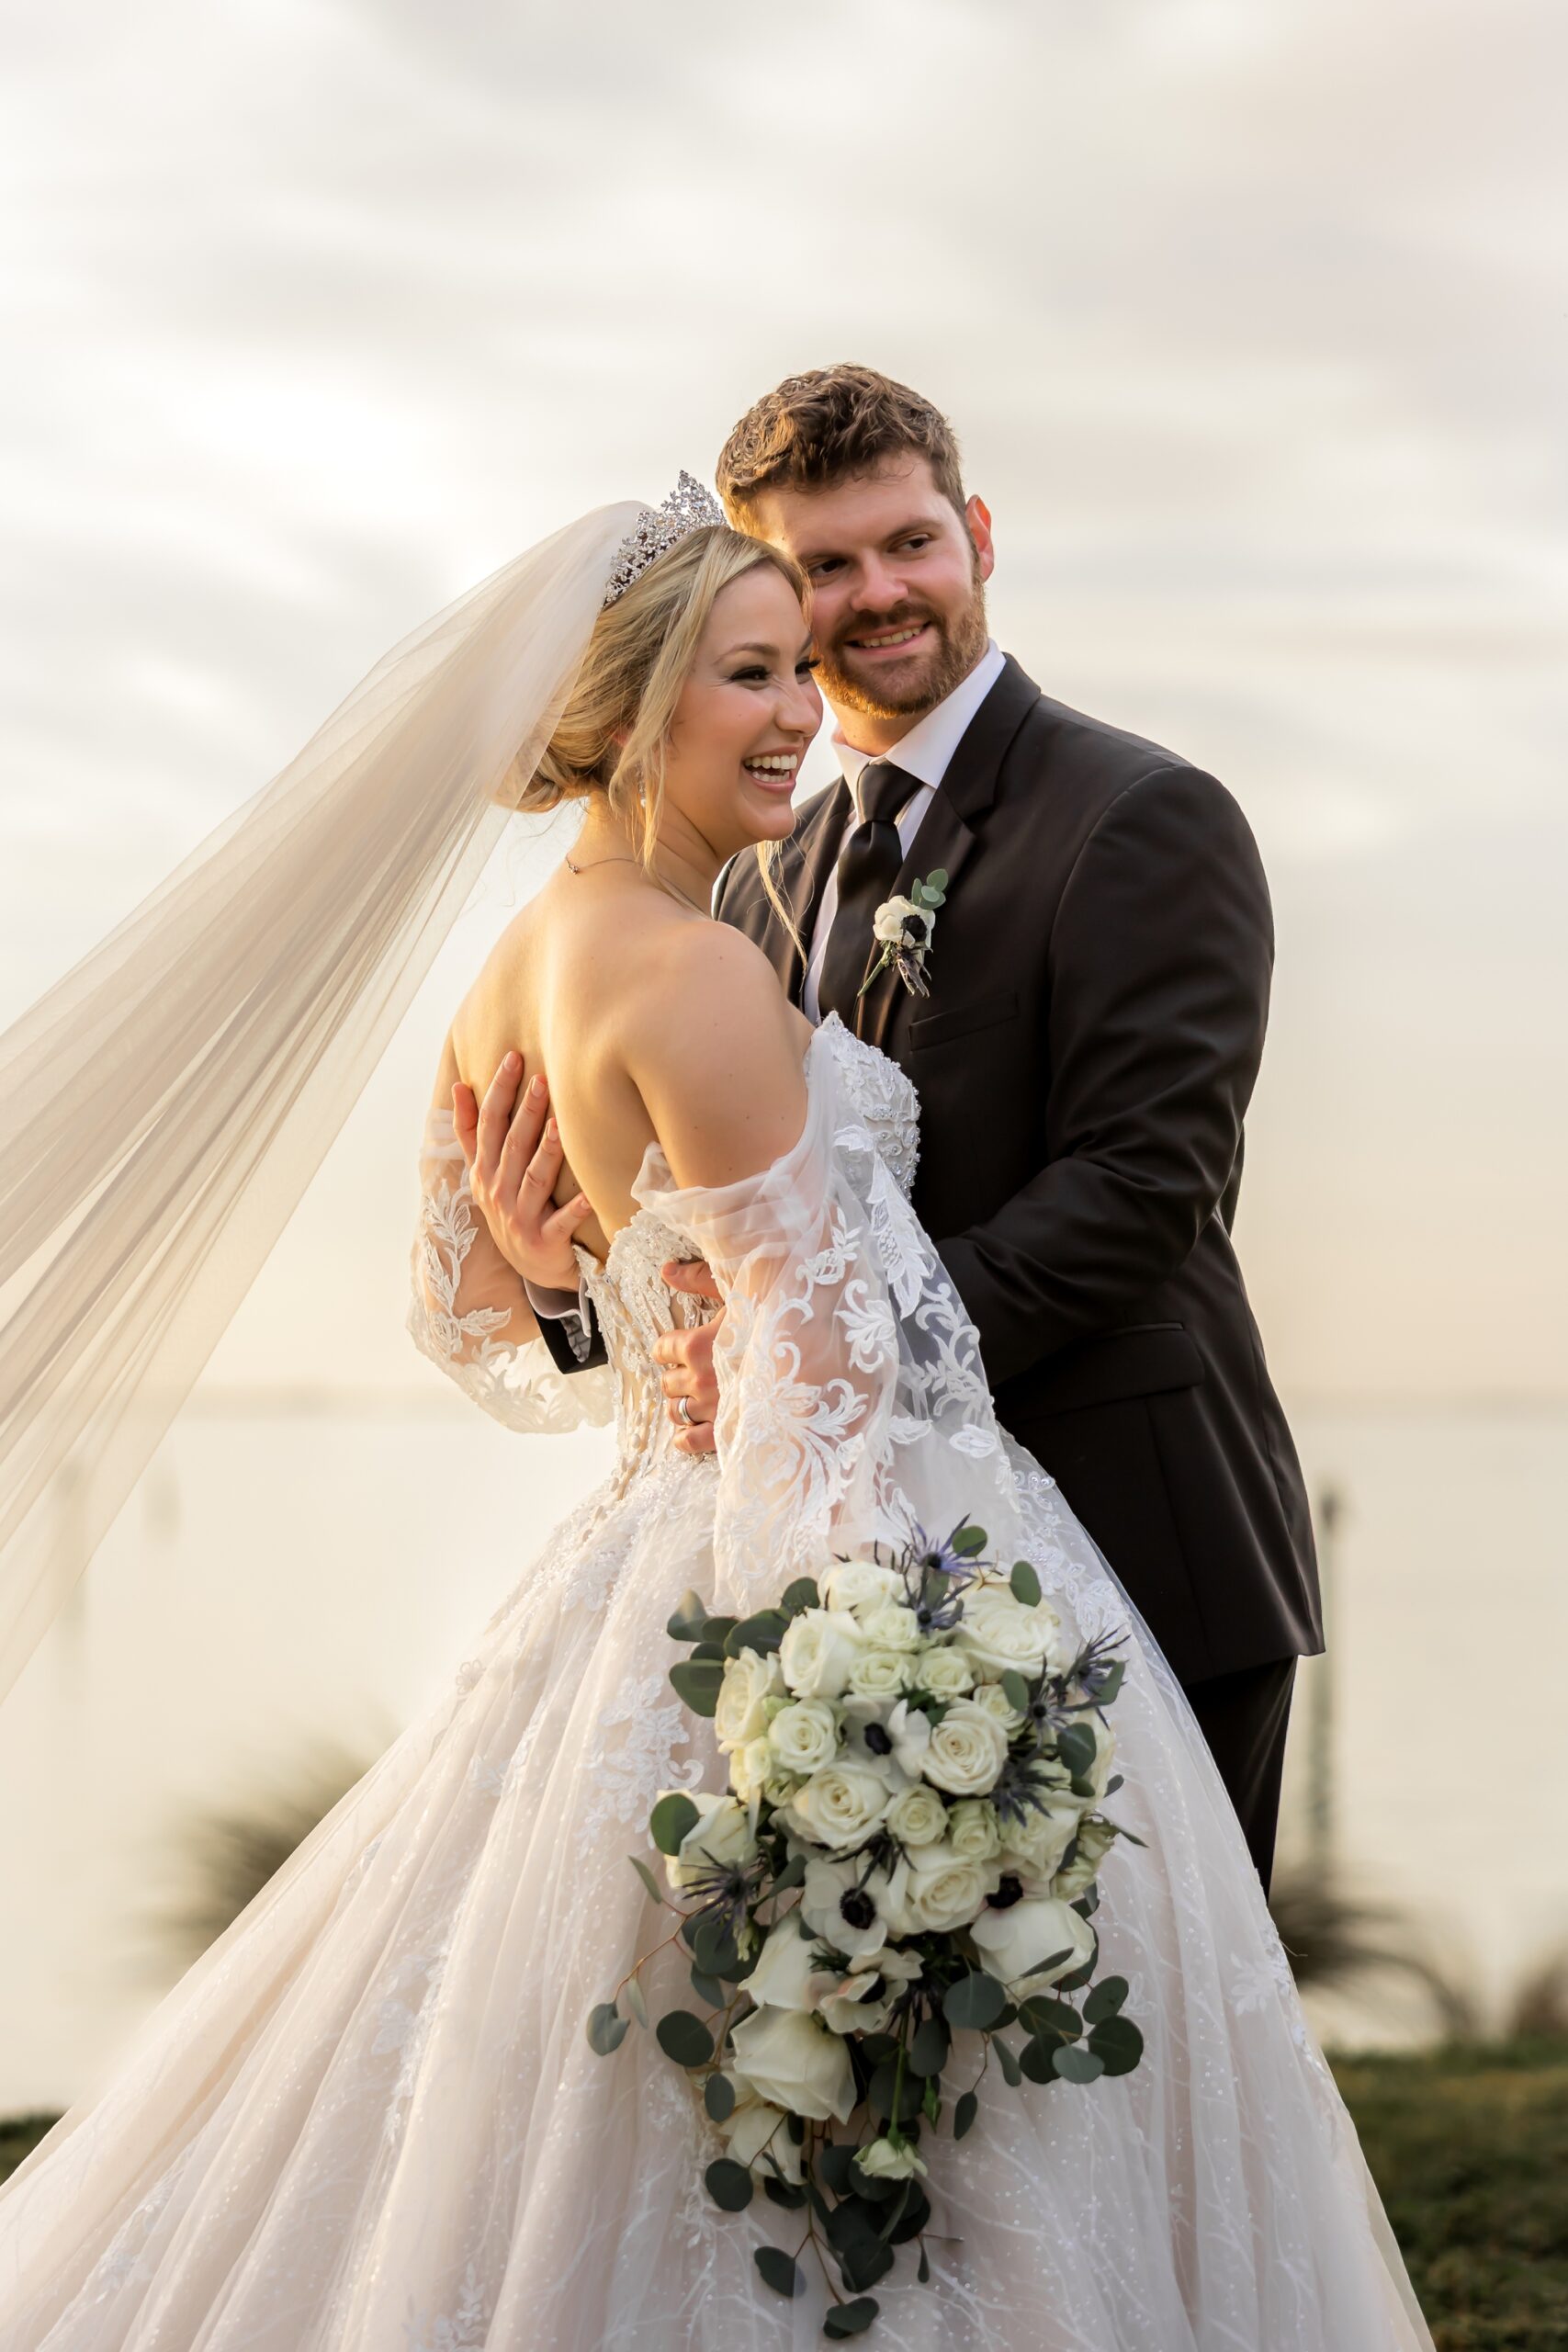 Candid shot of bride and groom, Ethan and Morgan, smiling and laughing after their ceremony at the Powel Crosley Estate in Sarasota.